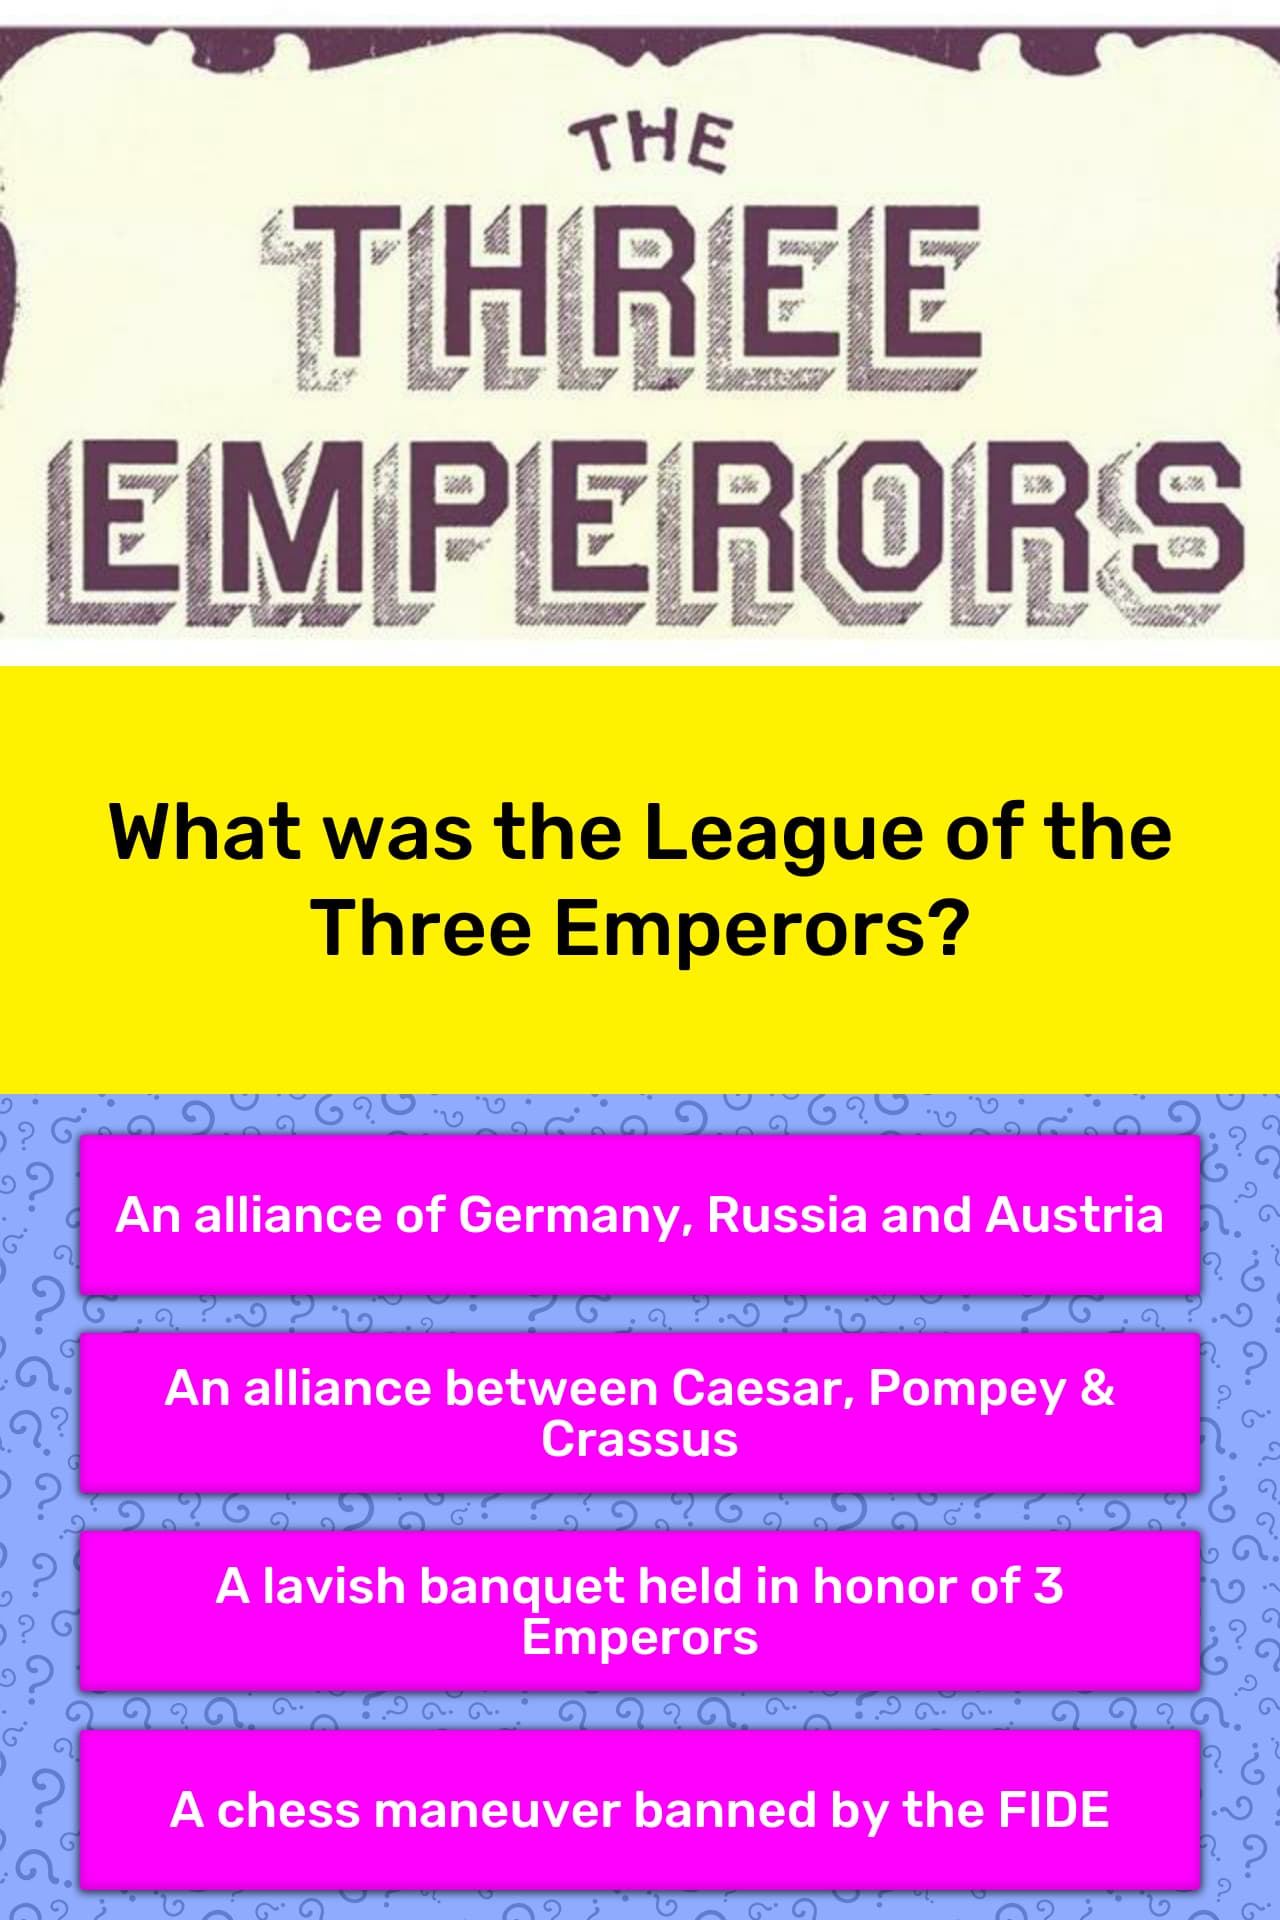 the league of three emperors 1873